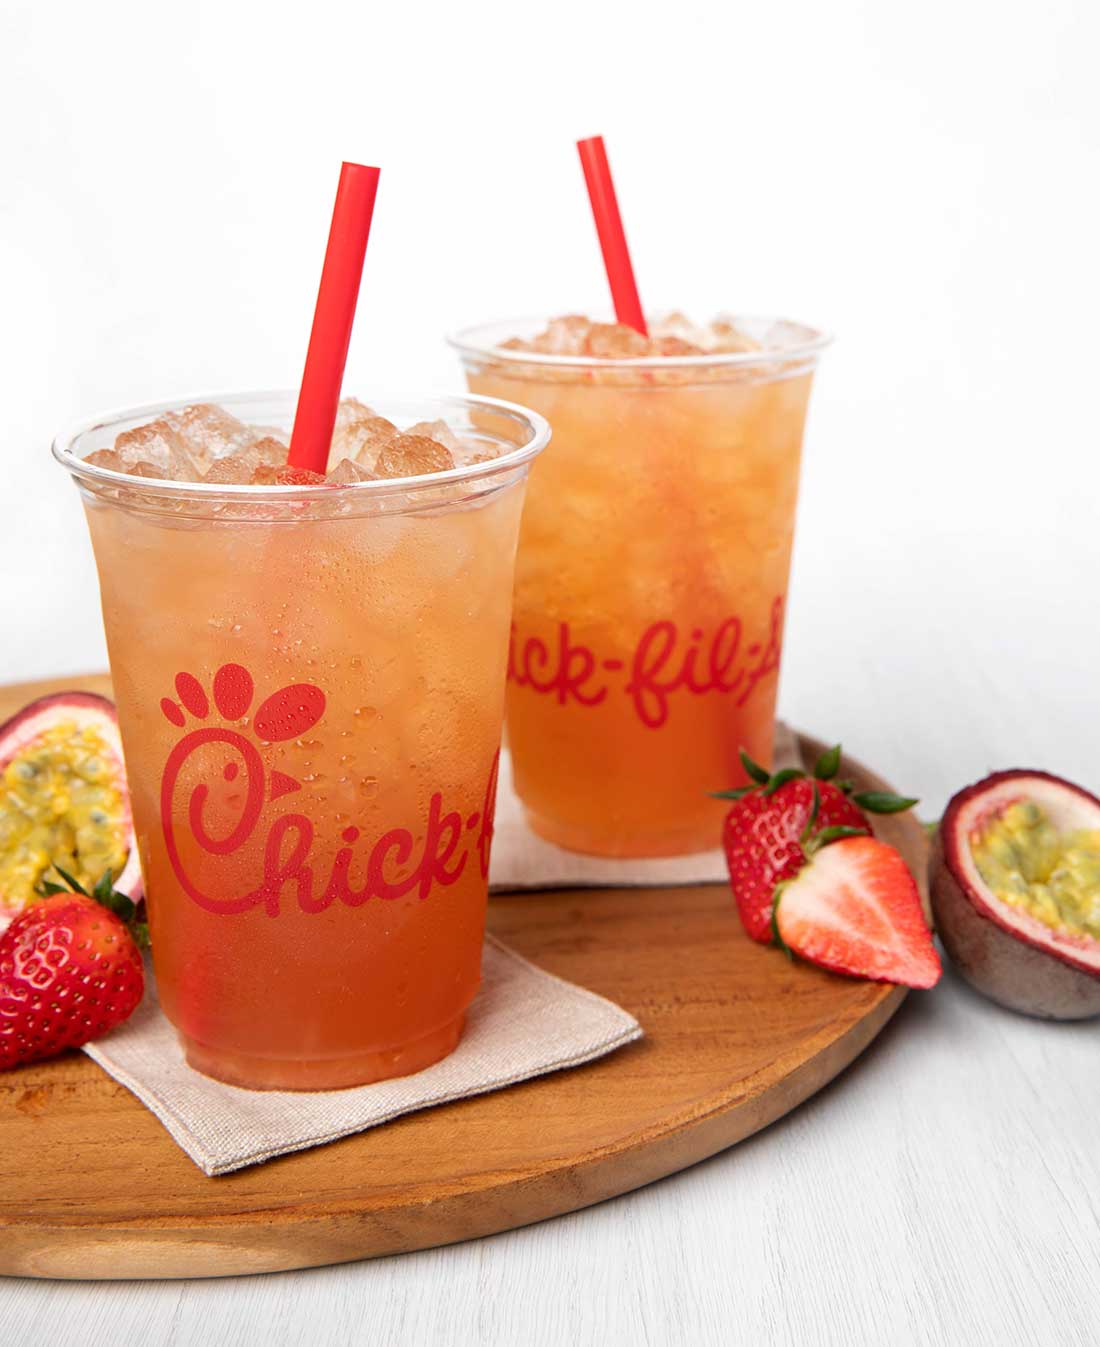 chick-fil-a-brings-back-summer-favorite-and-introduces-new-seasonal